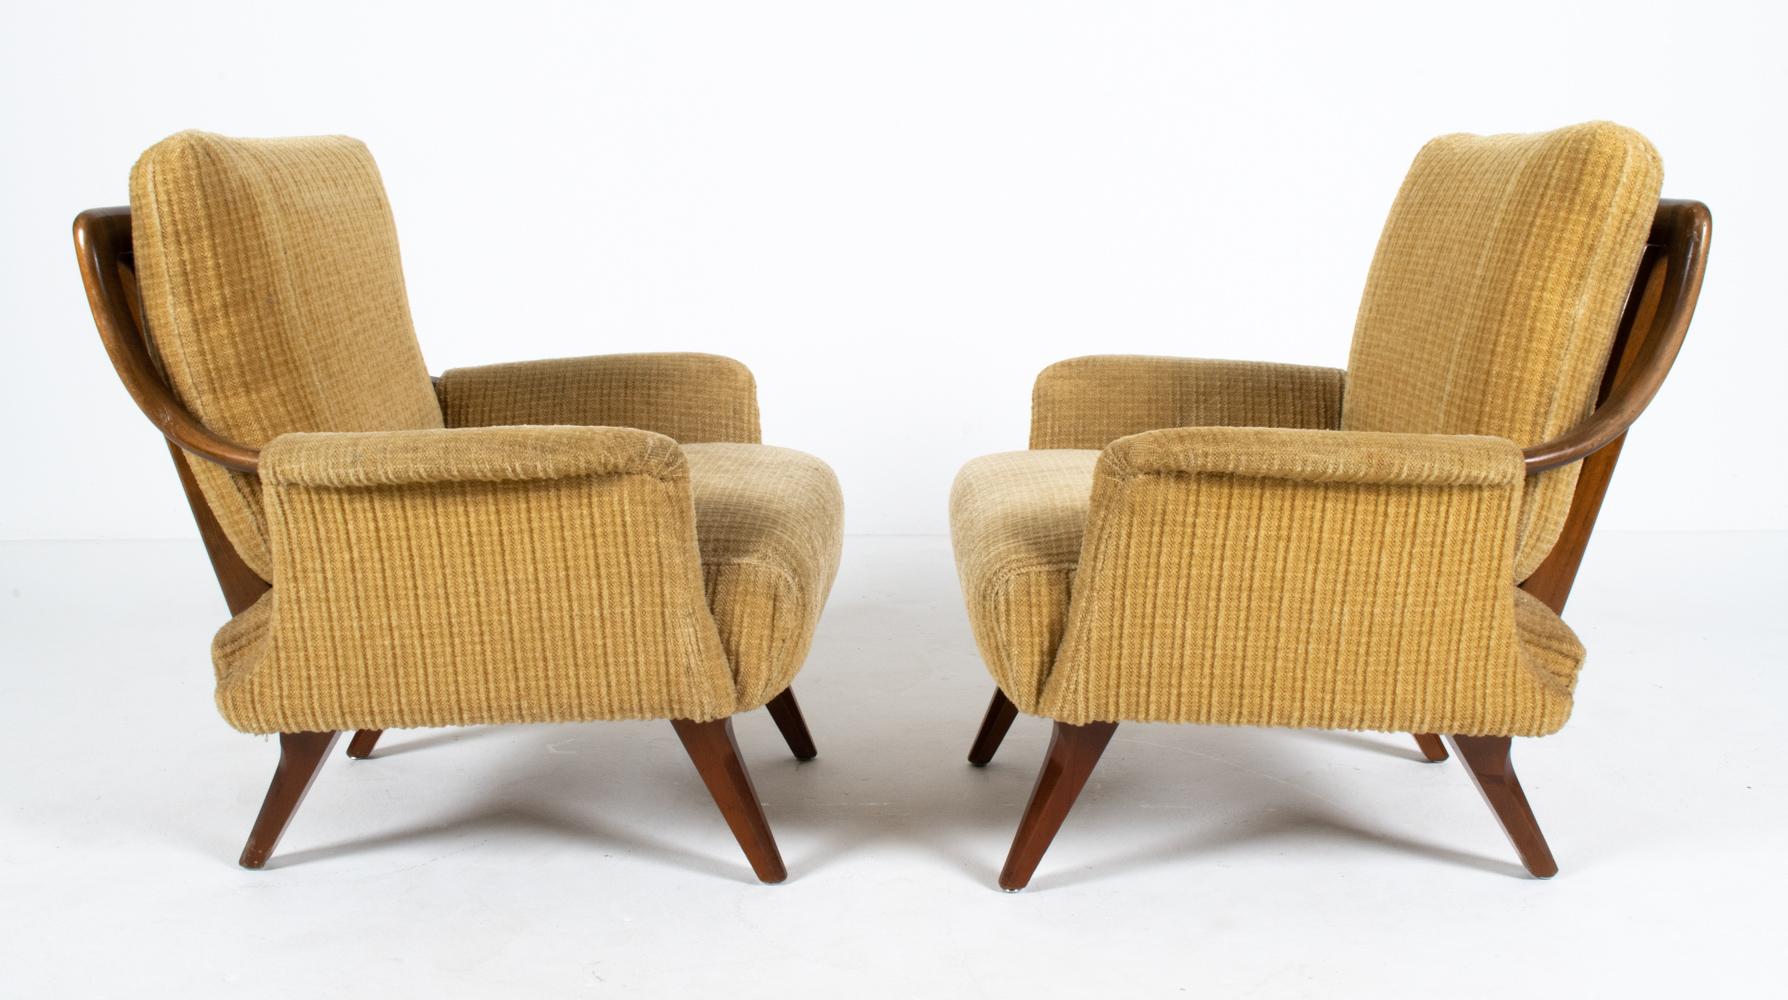 Pair of Scandinavian Mid-Century Lounge Chairs, c. 1950's For Sale 7